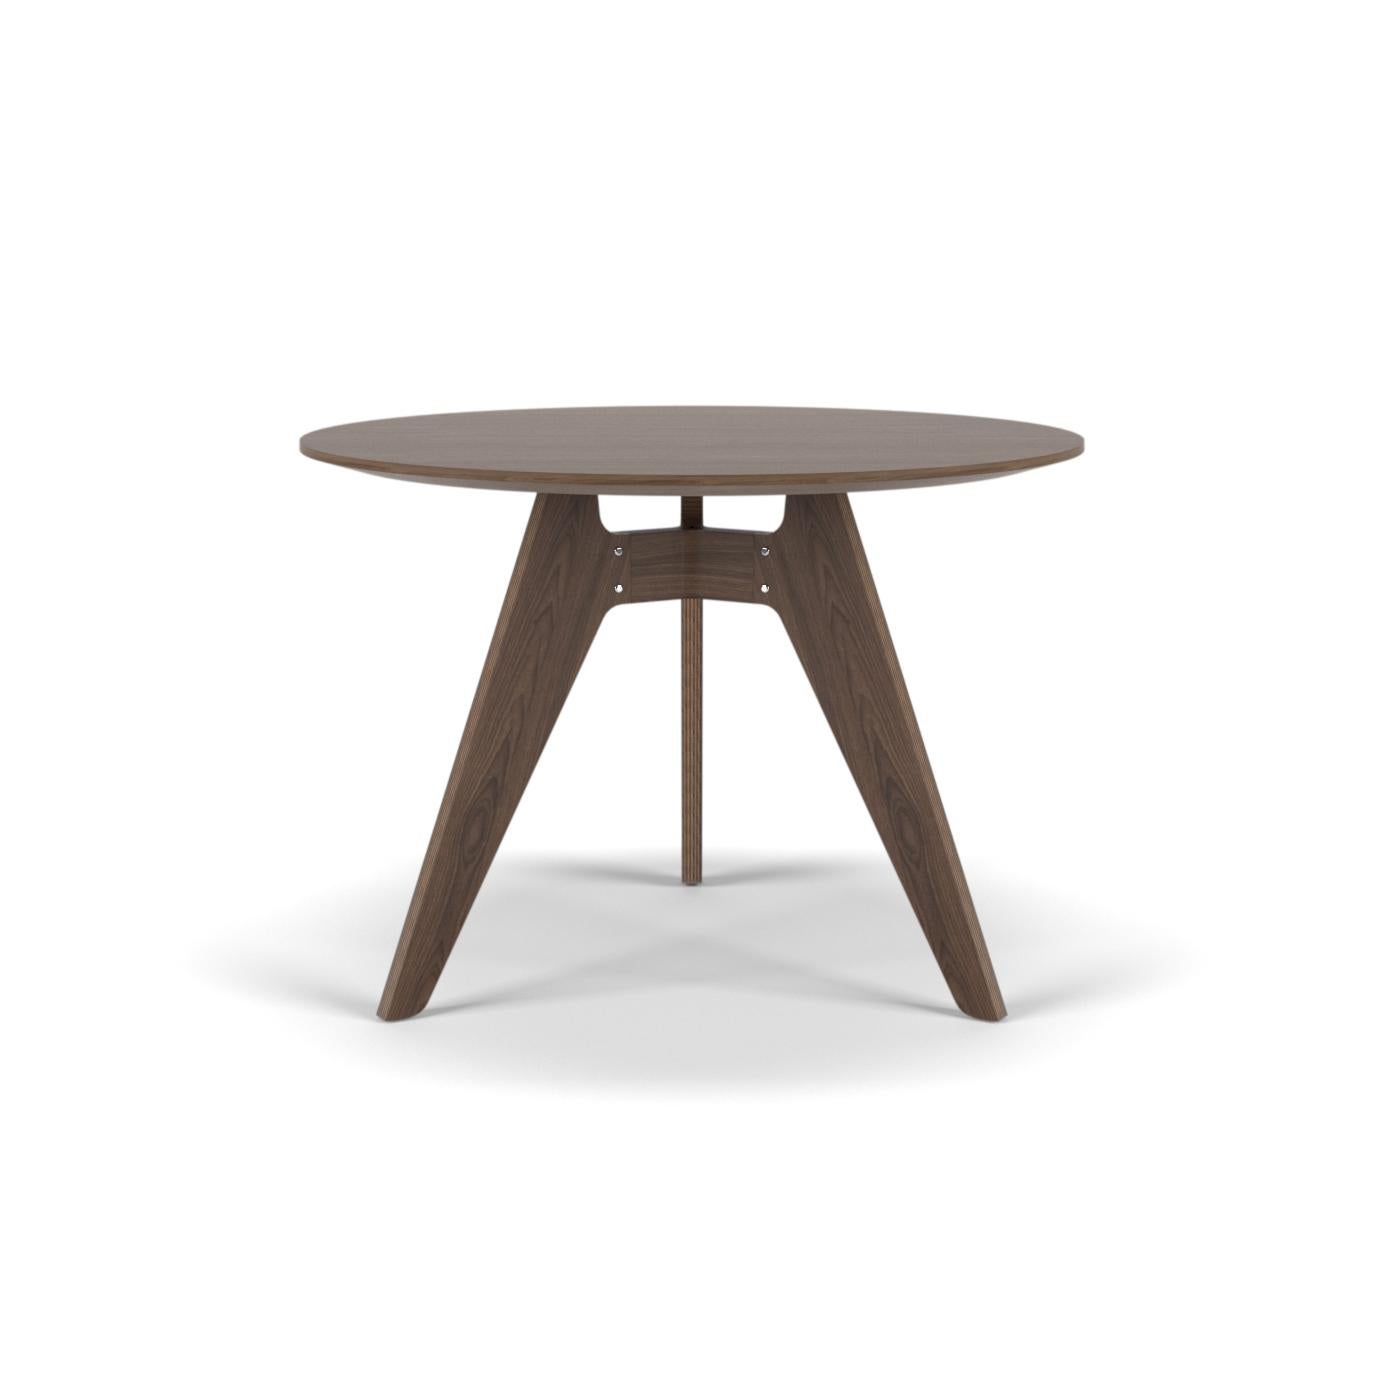 Contemporary Modern Round Table 'Lavitta' by Poiat, Black Oak, 100cm For Sale